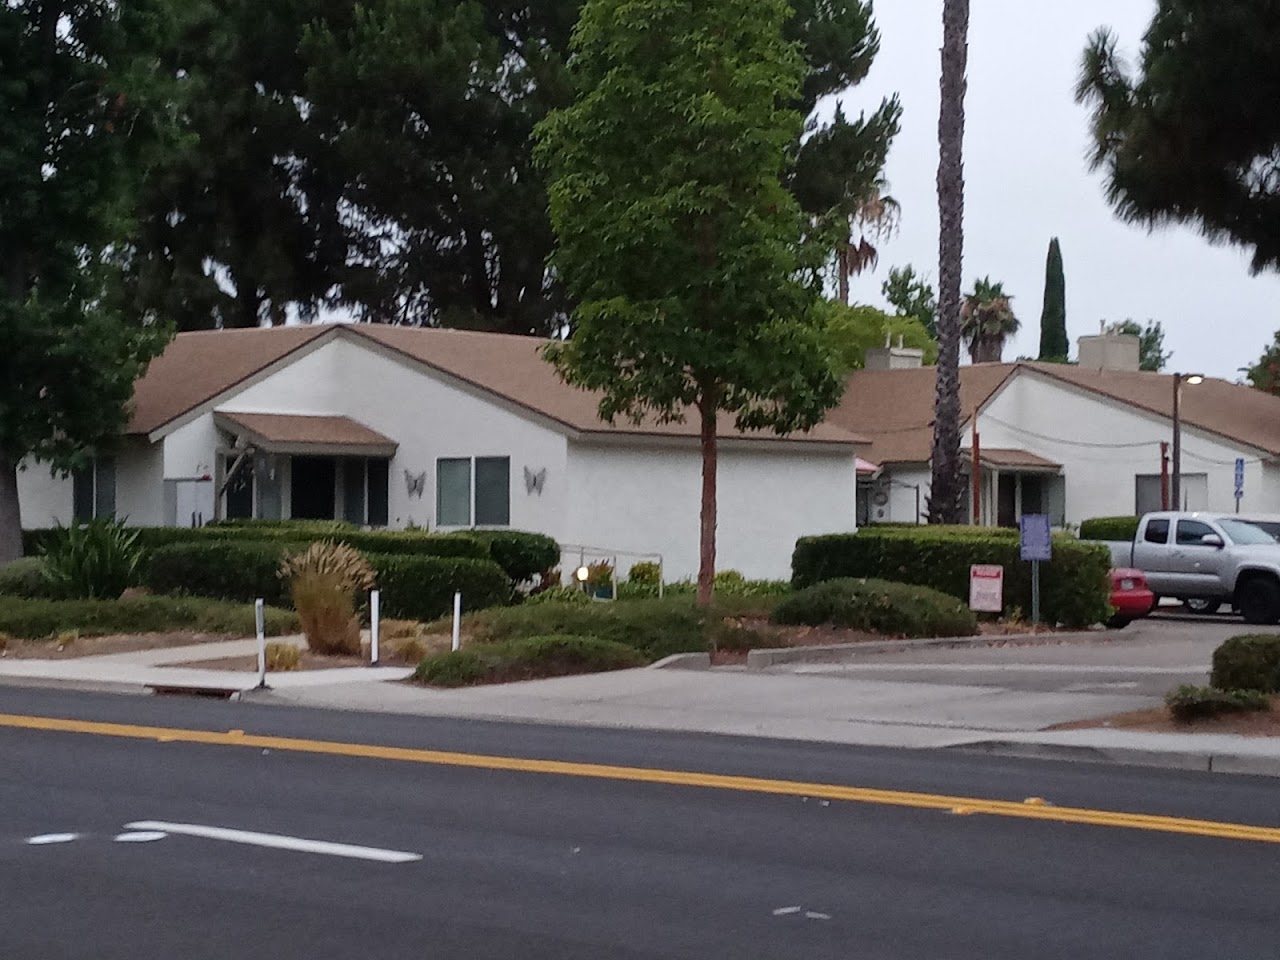 Photo of WINDSOR GARDENS. Affordable housing located at 1600 WEST 9TH AVENUE ESCONDIDO, CA 92029